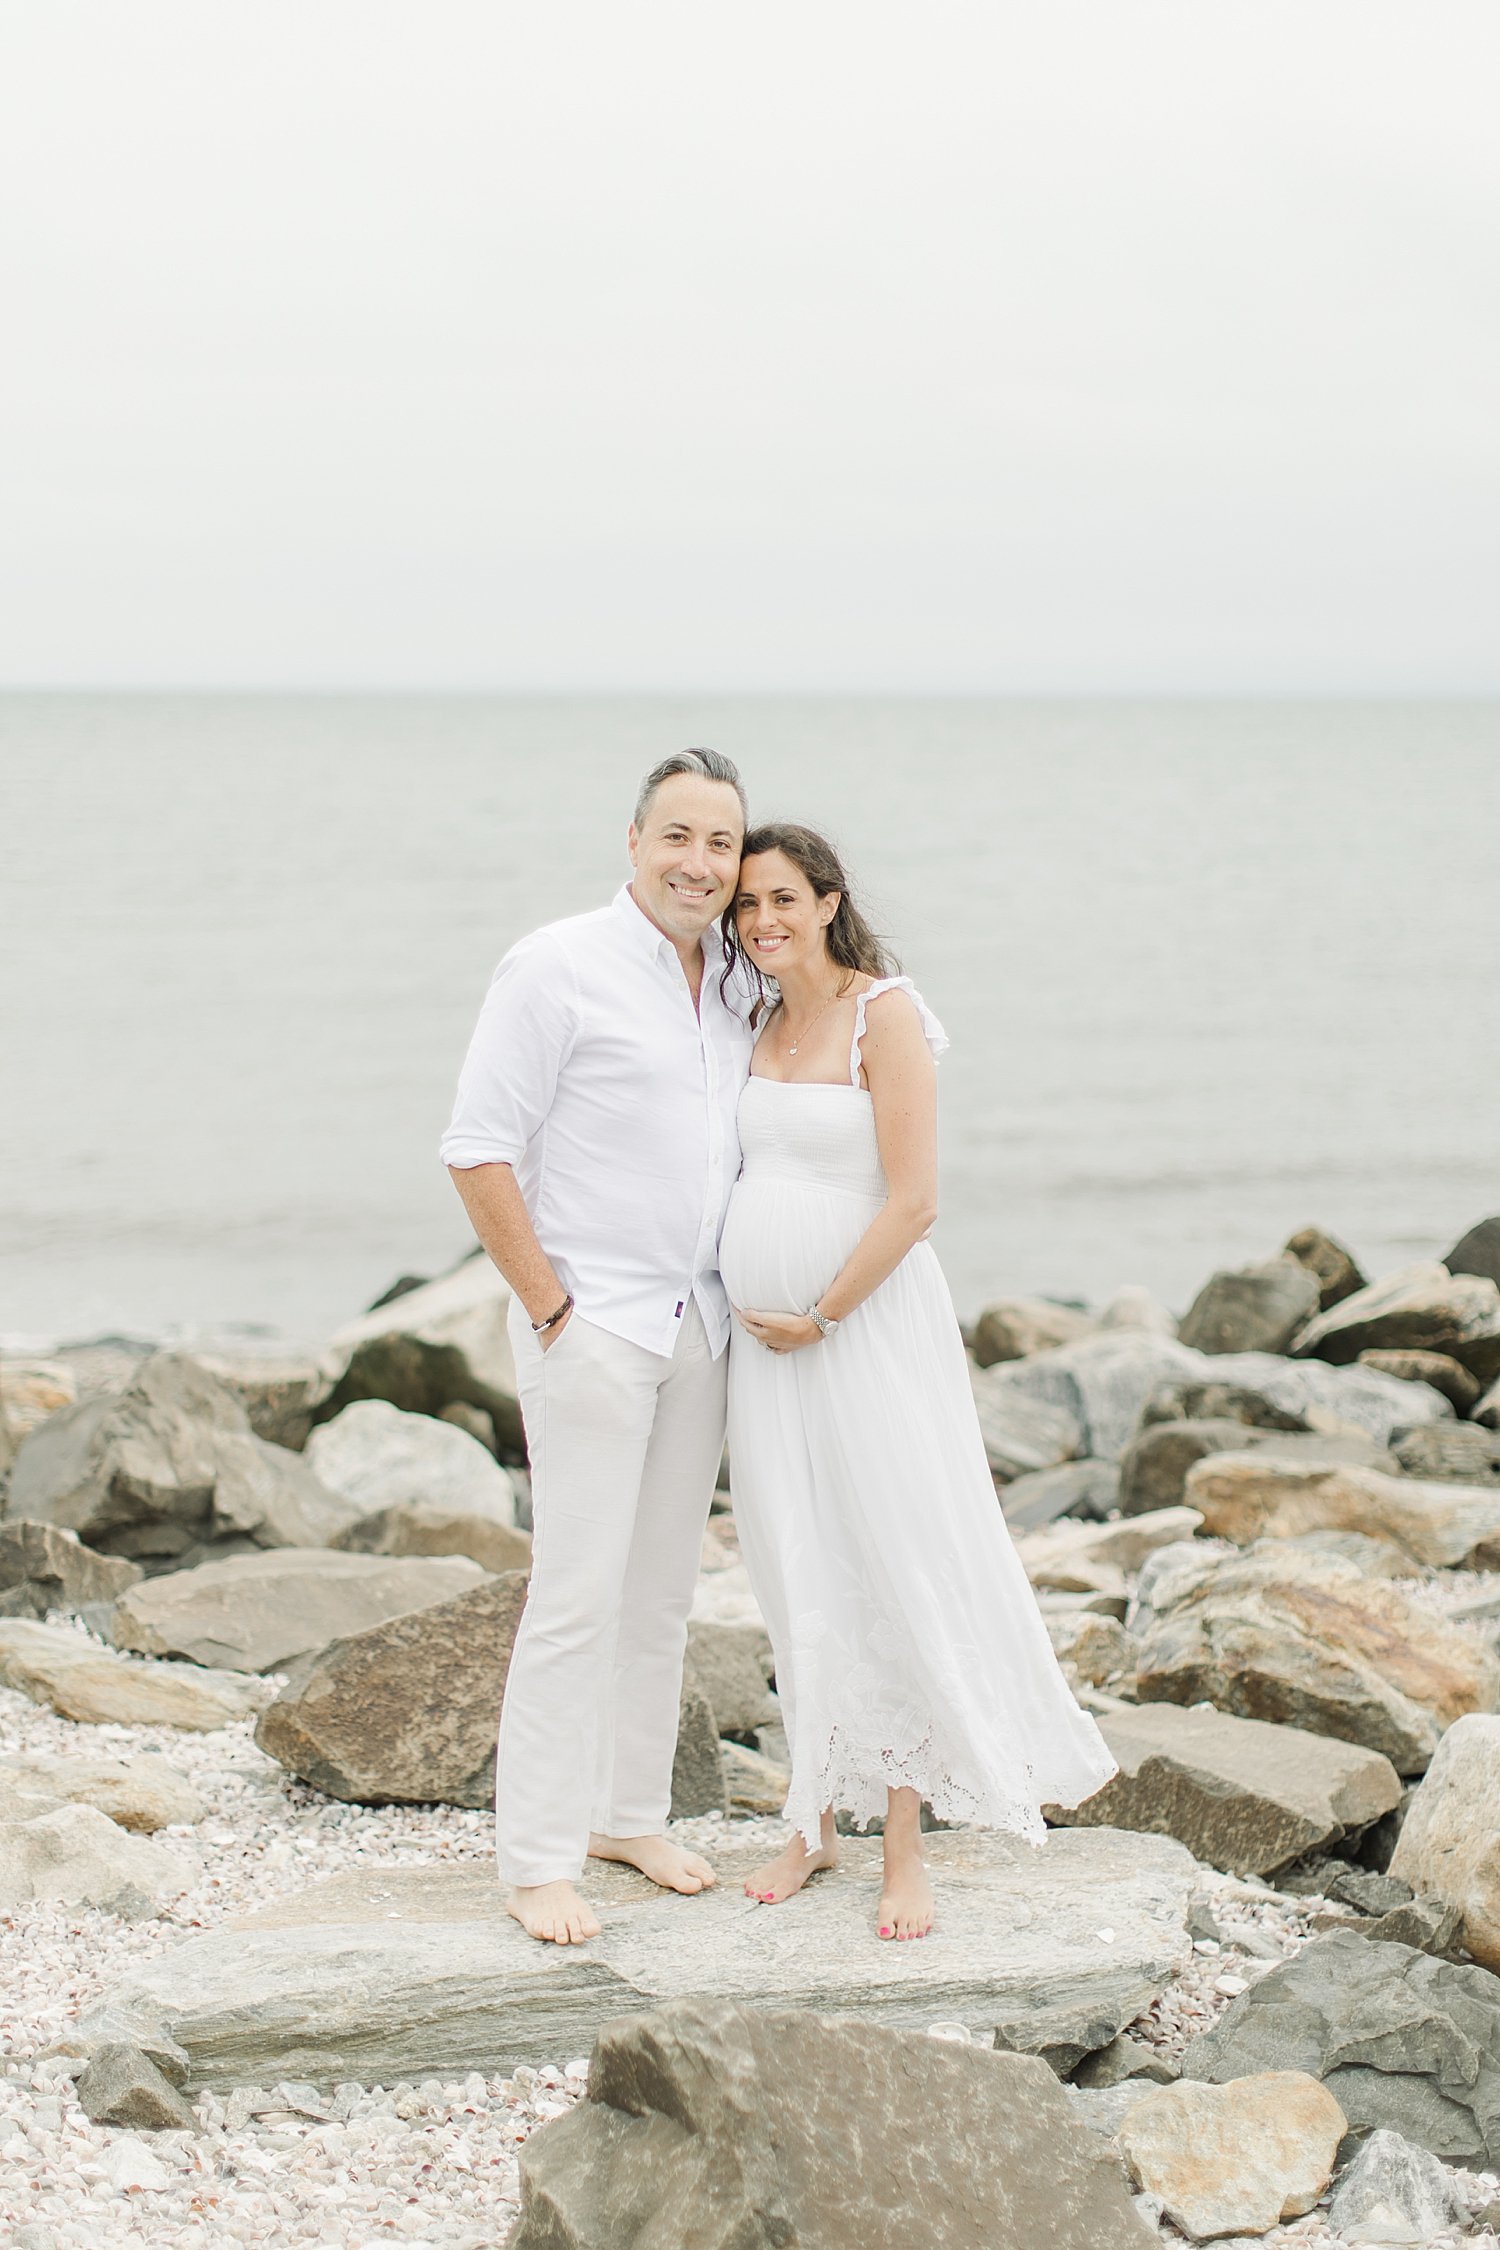 Overcast session at Sherwood Island with expecting parents. Photo by Kristin Wood Photography.